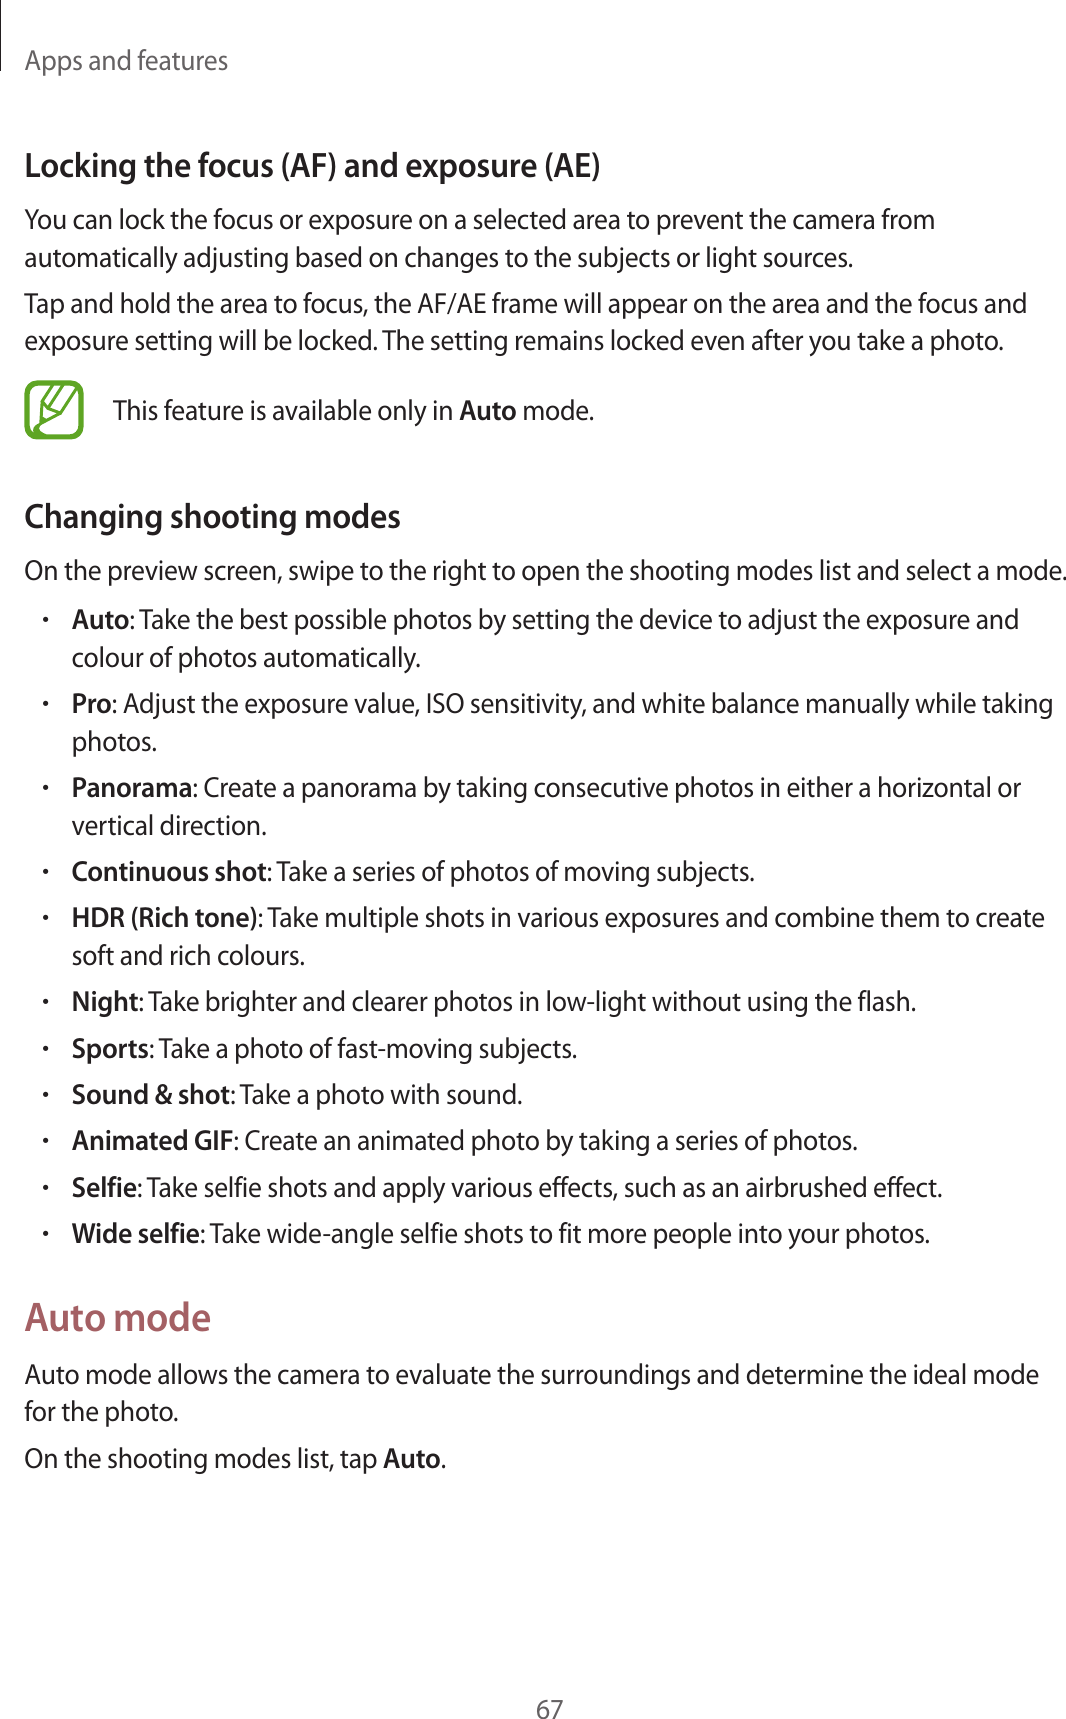 Apps and features67Locking the focus (AF) and exposure (AE)You can lock the focus or exposure on a selected area to prevent the camera from automatically adjusting based on changes to the subjects or light sources.Tap and hold the area to focus, the AF/AE frame will appear on the area and the focus and exposure setting will be locked. The setting remains locked even after you take a photo.This feature is available only in Auto mode.Changing shooting modesOn the preview screen, swipe to the right to open the shooting modes list and select a mode.•Auto: Take the best possible photos by setting the device to adjust the exposure and colour of photos automatically.•Pro: Adjust the exposure value, ISO sensitivity, and white balance manually while taking photos.•Panorama: Create a panorama by taking consecutive photos in either a horizontal or vertical direction.•Continuous shot: Take a series of photos of moving subjects.•HDR (Rich tone): Take multiple shots in various exposures and combine them to create soft and rich colours.•Night: Take brighter and clearer photos in low-light without using the flash.•Sports: Take a photo of fast-moving subjects.•Sound &amp; shot: Take a photo with sound.•Animated GIF: Create an animated photo by taking a series of photos.•Selfie: Take selfie shots and apply various effects, such as an airbrushed effect.•Wide selfie: Take wide-angle selfie shots to fit more people into your photos.Auto modeAuto mode allows the camera to evaluate the surroundings and determine the ideal mode for the photo.On the shooting modes list, tap Auto.